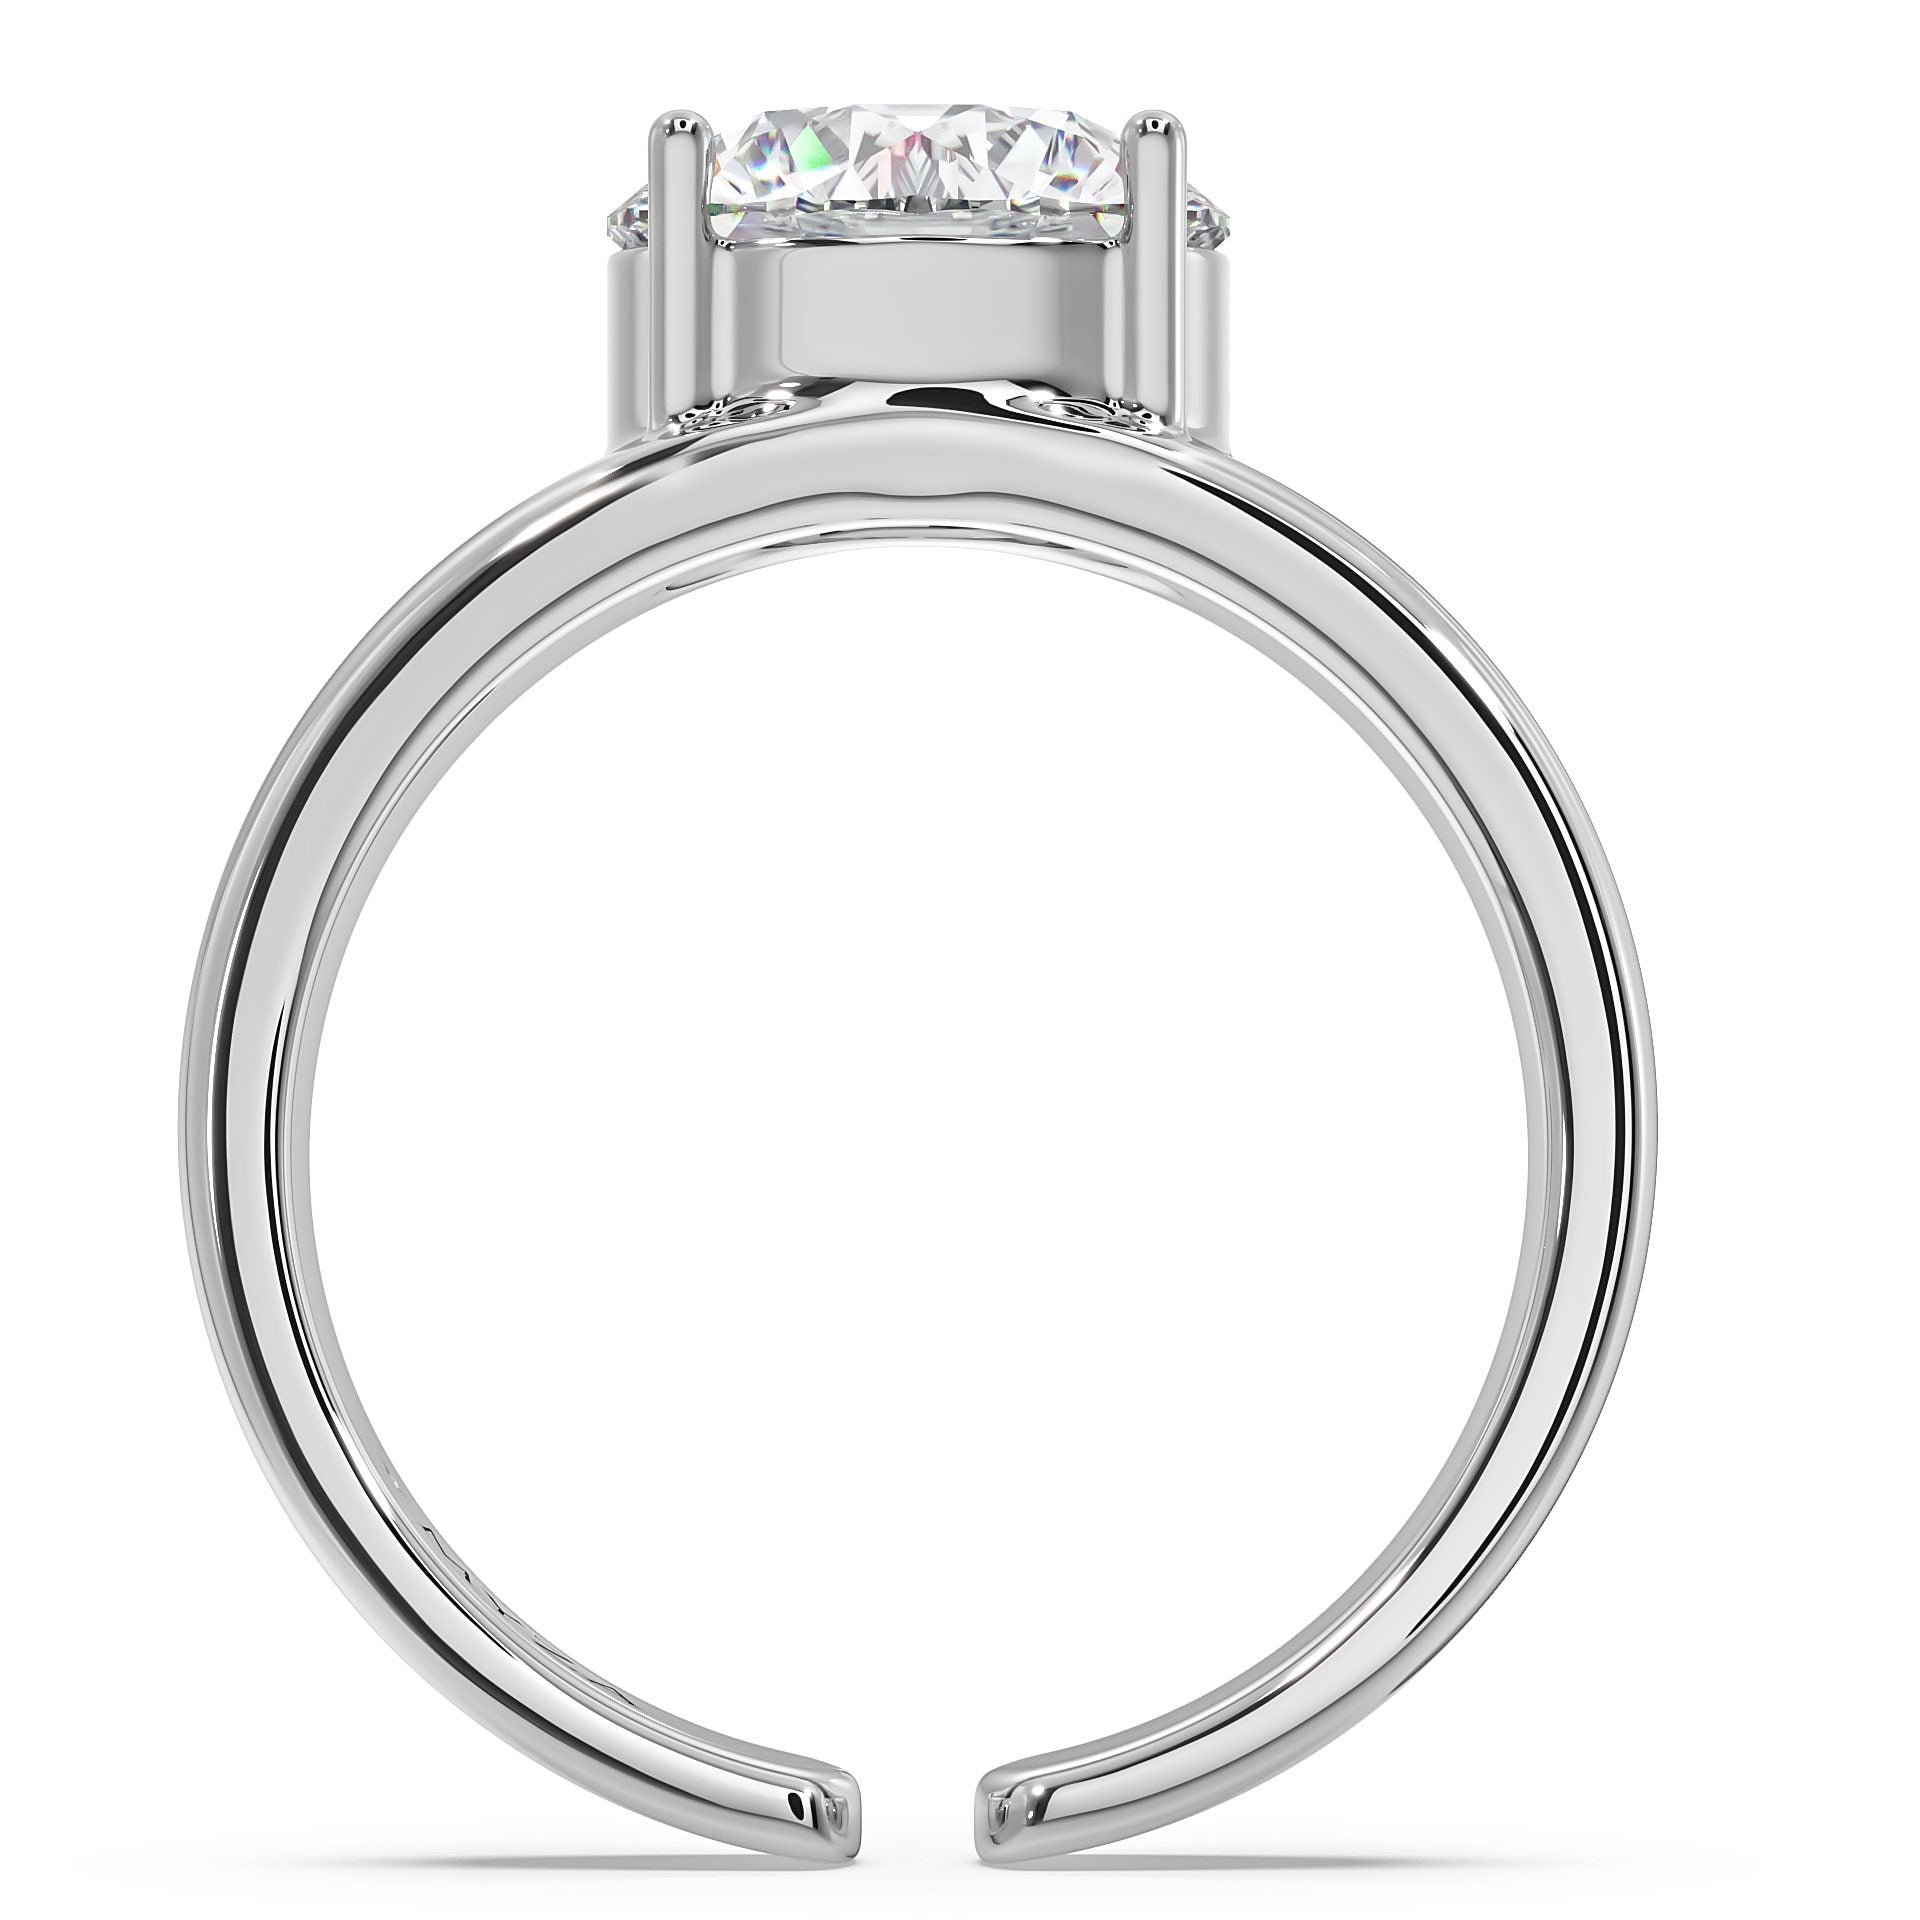 Myza 4-Carat Sterling Silver Men's Ring - Affordable Luxury Solitaire, Symbol of Love with Lab-Grown Diamonds